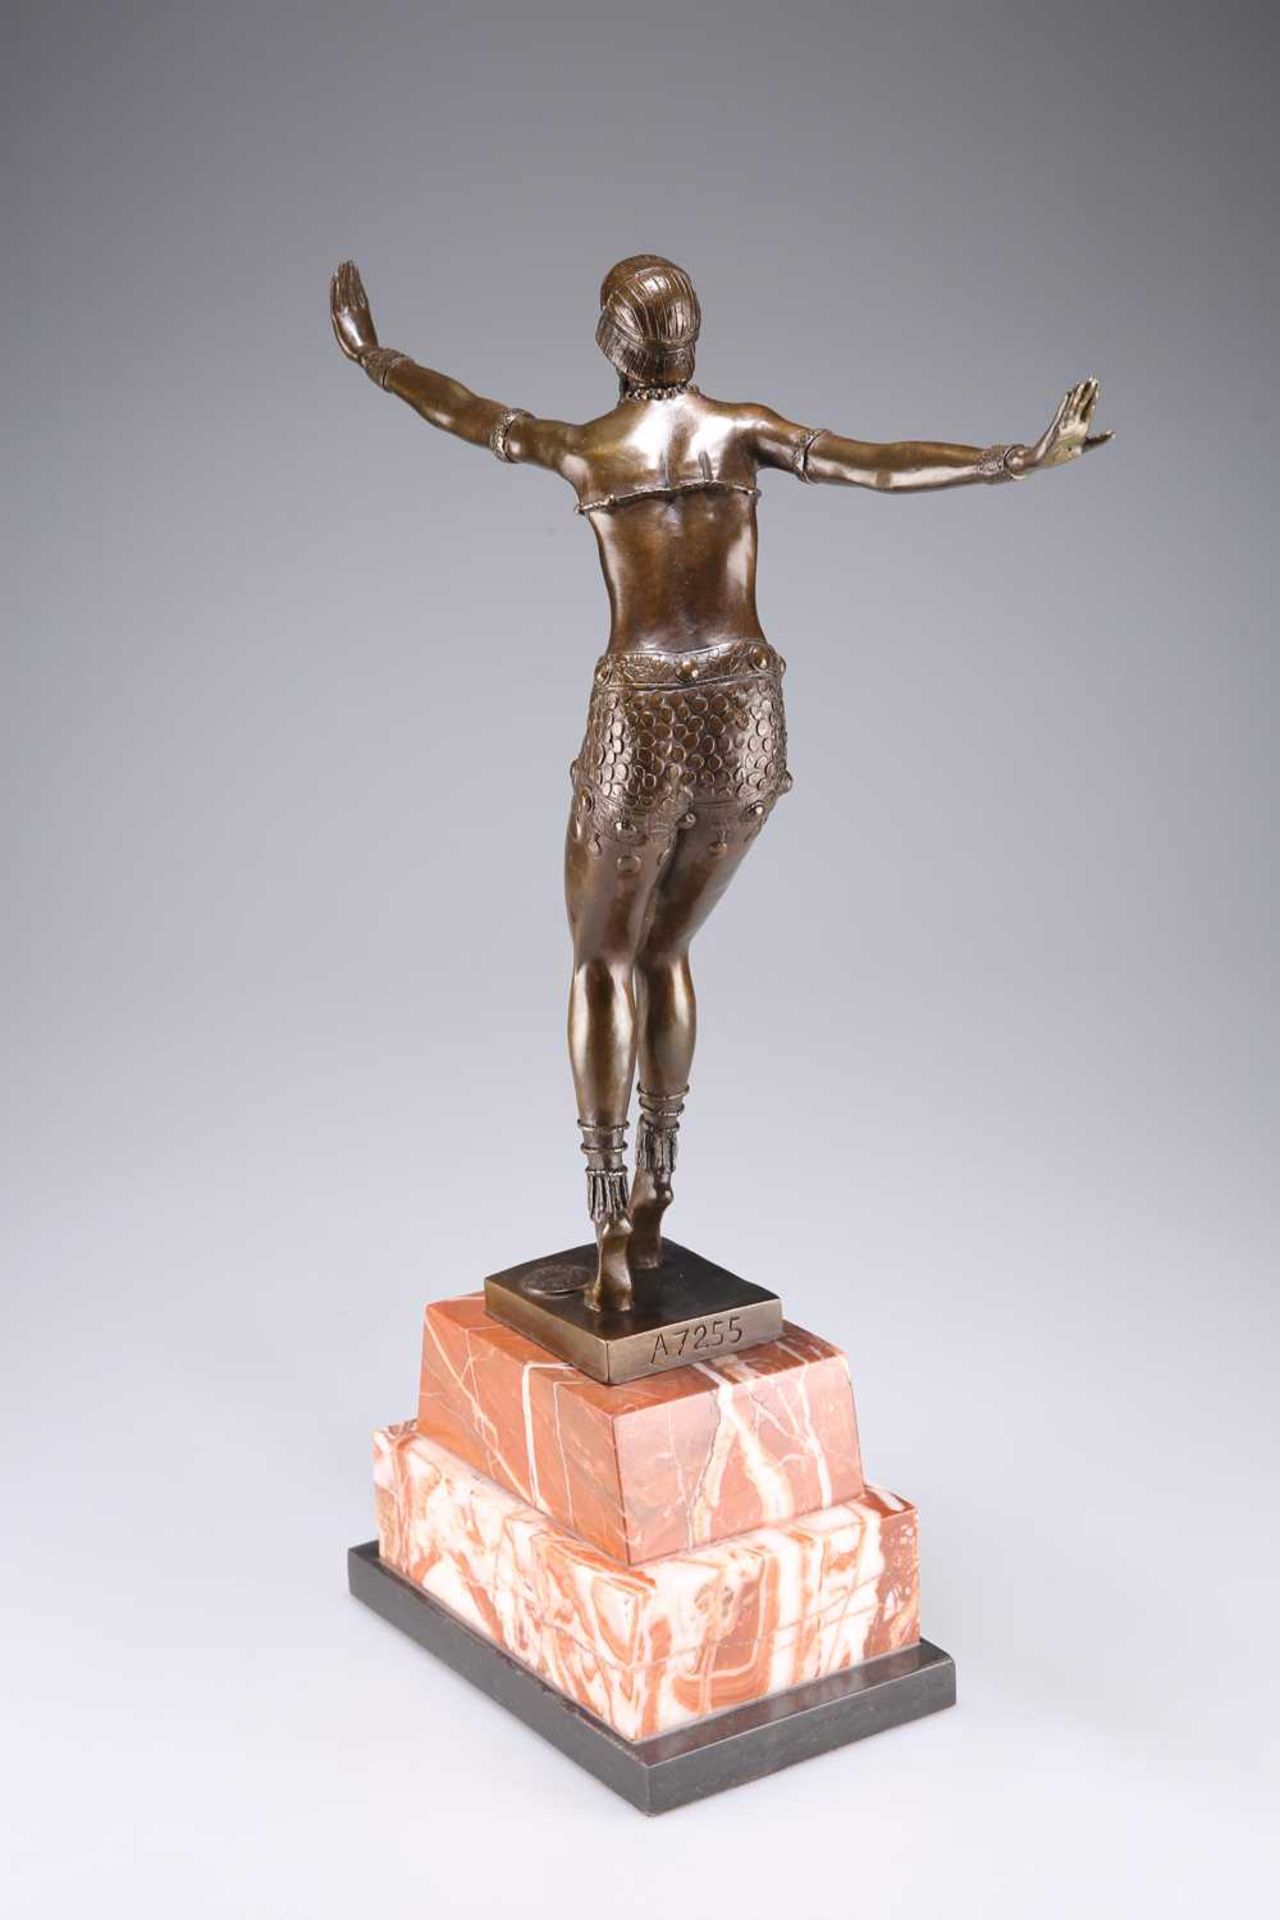 AN ART DECO STYLE BRONZE AND MARBLE FIGURE, THE 'PHOENICIAN DANCER' - Image 2 of 4